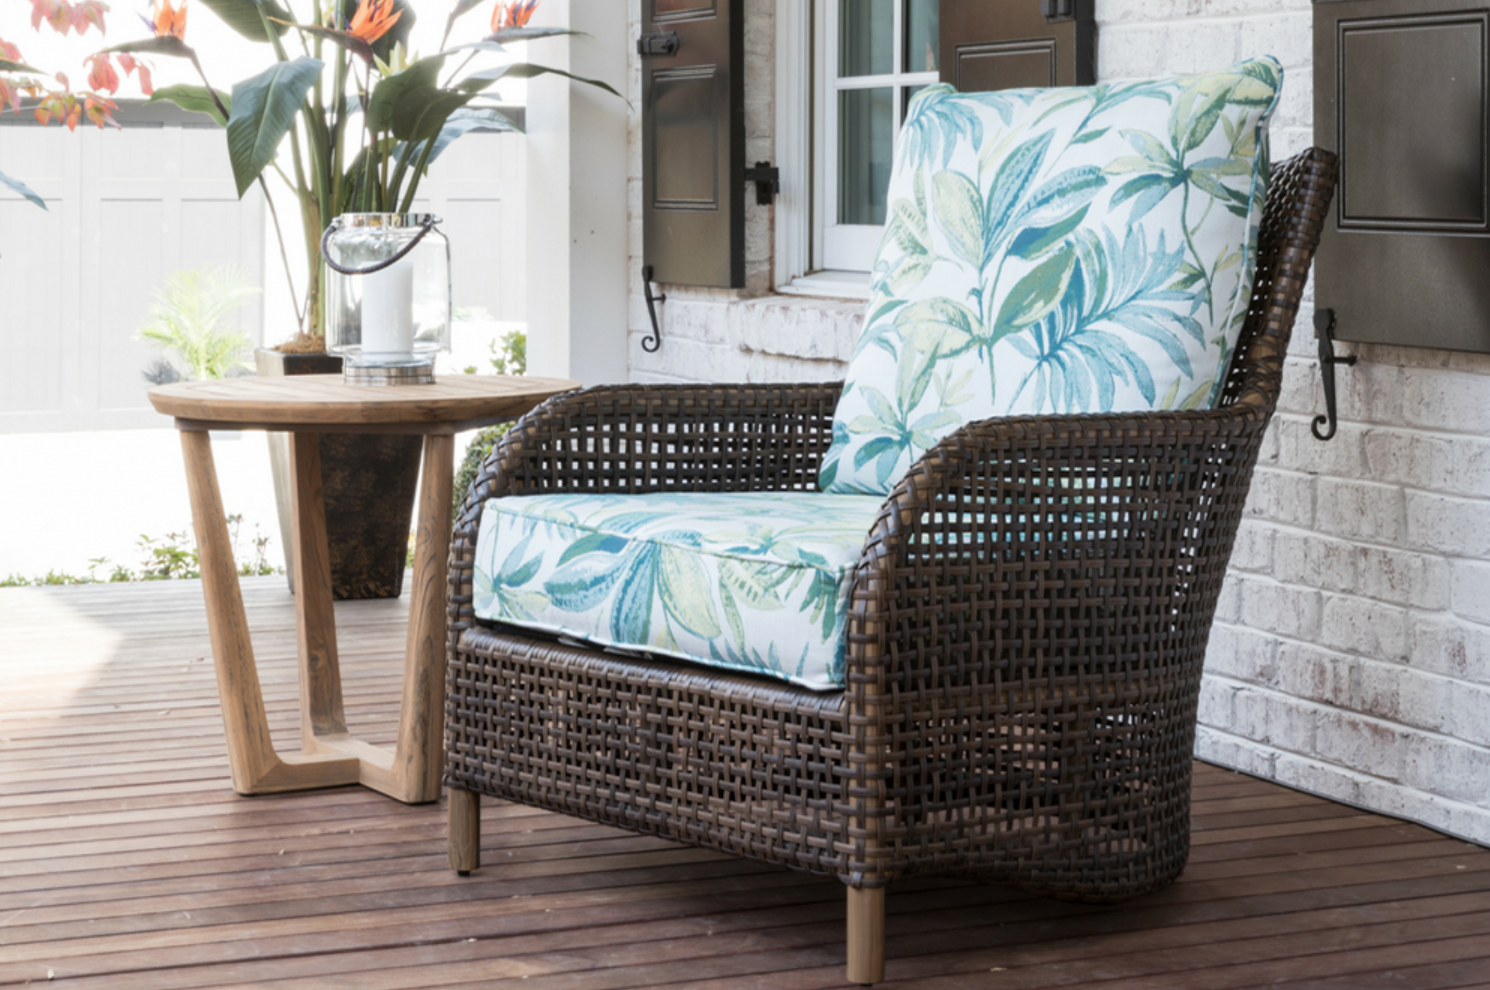 Lloyd Flanders features quality woven furniture--some of the best, classic outdoor furniture you’ll find! What we can expect to see: Luxurious outdoor furnishings with the luxe shapes of formal interior living room furniture